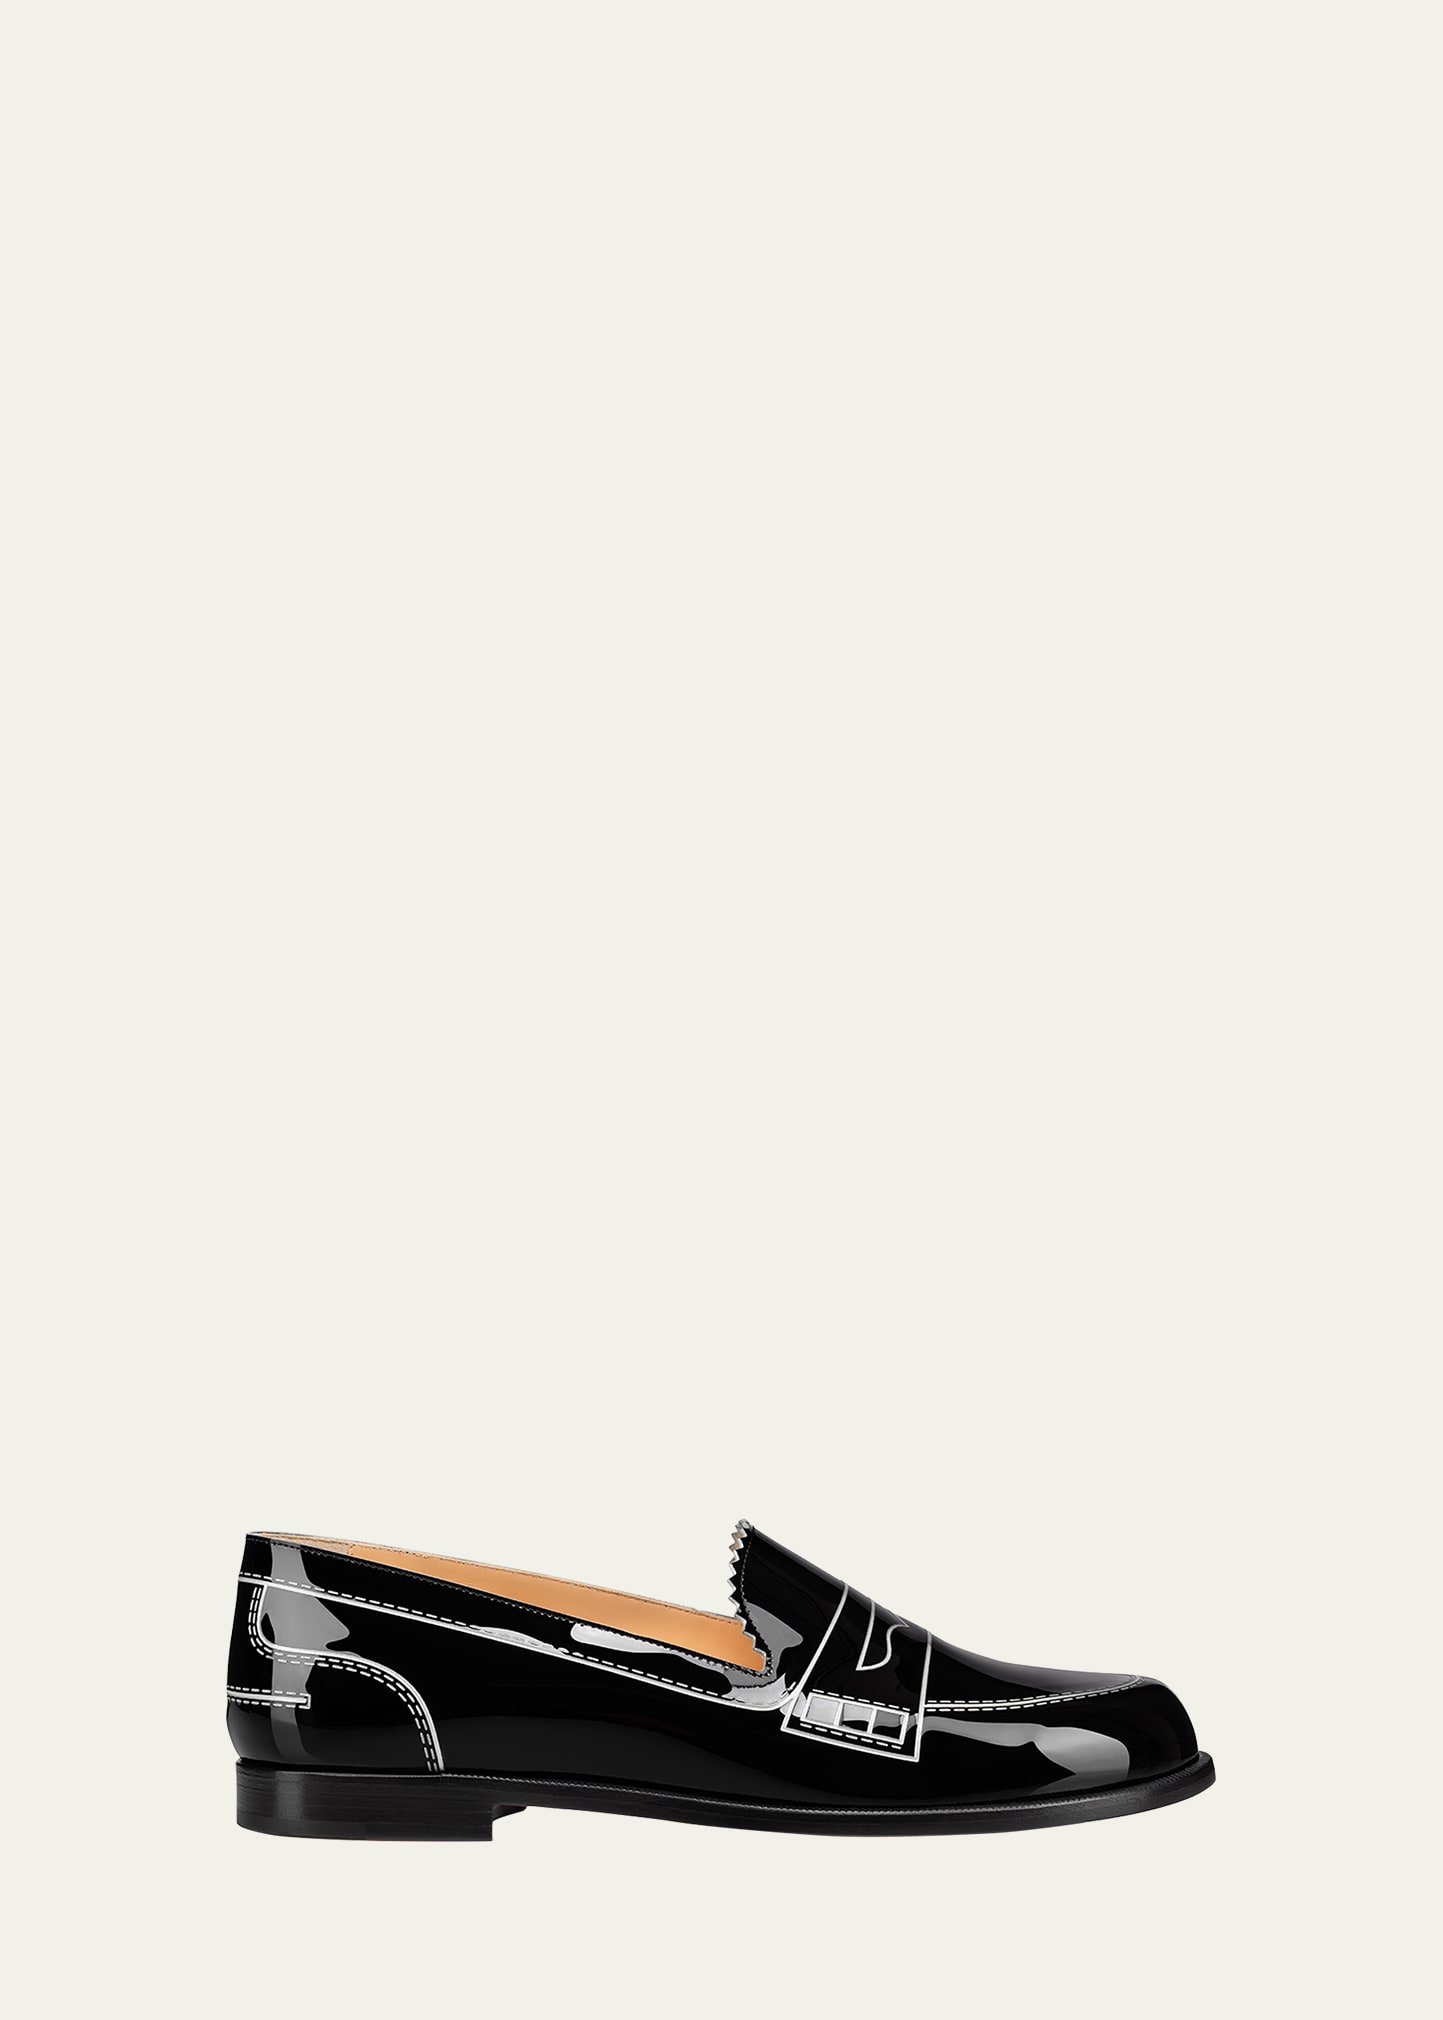 Christian Louboutin Mocalaureat Patent Printed Penny Loafers